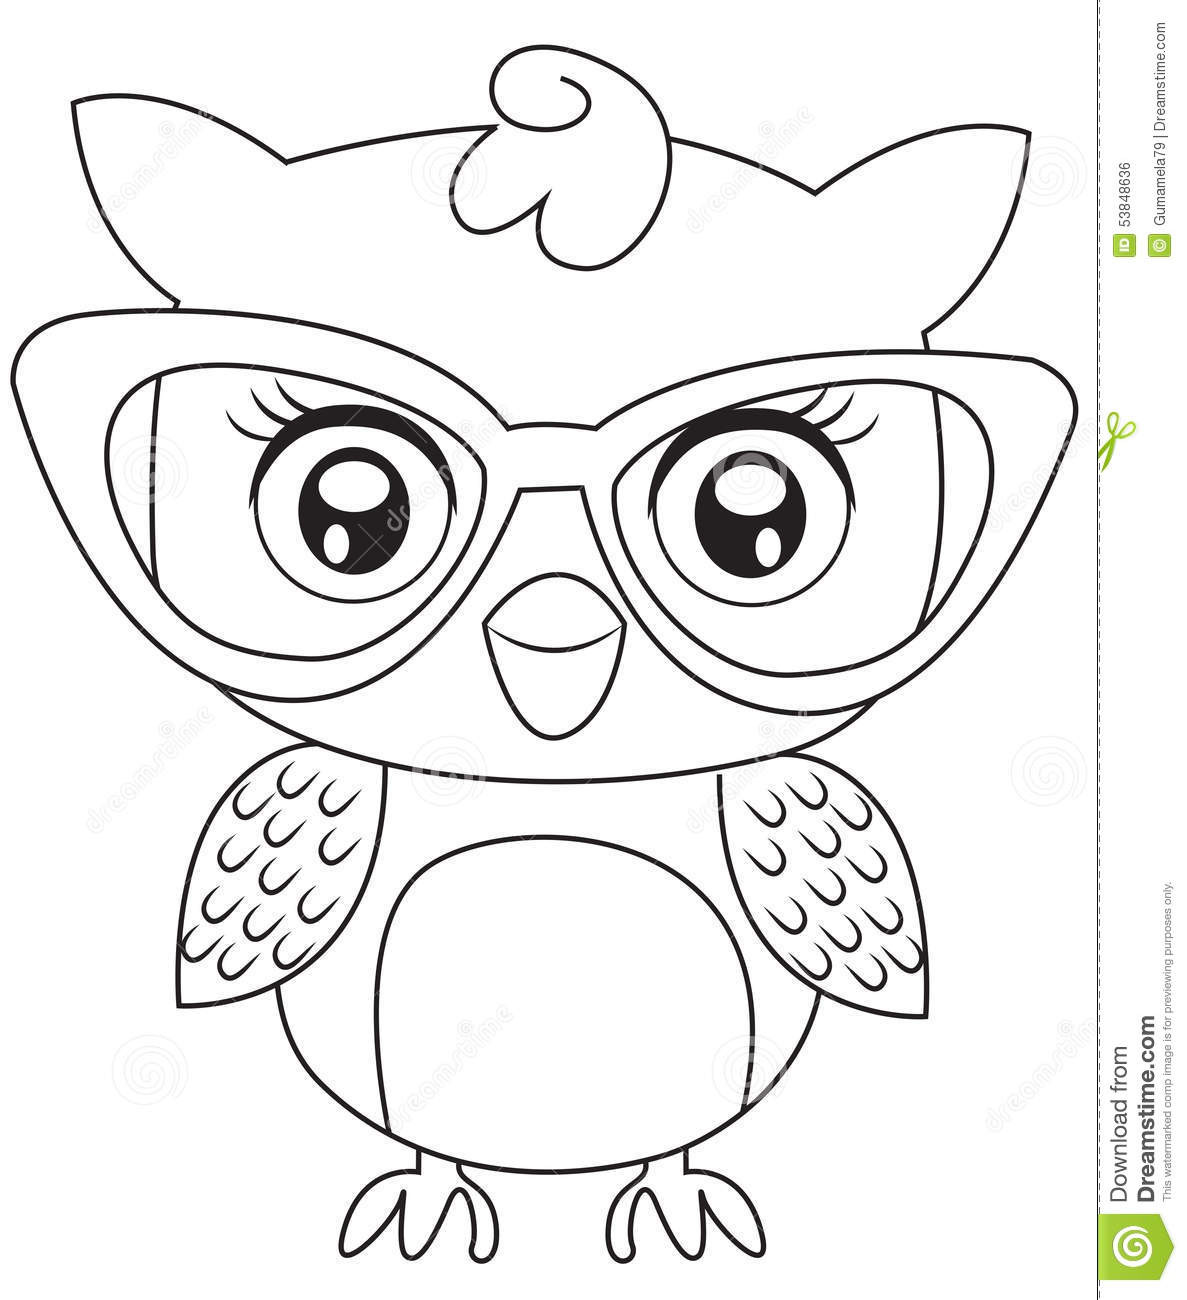 Coloring Pages For Girls Owls
 Owl With Eyeglasses Coloring Page Stock Illustration